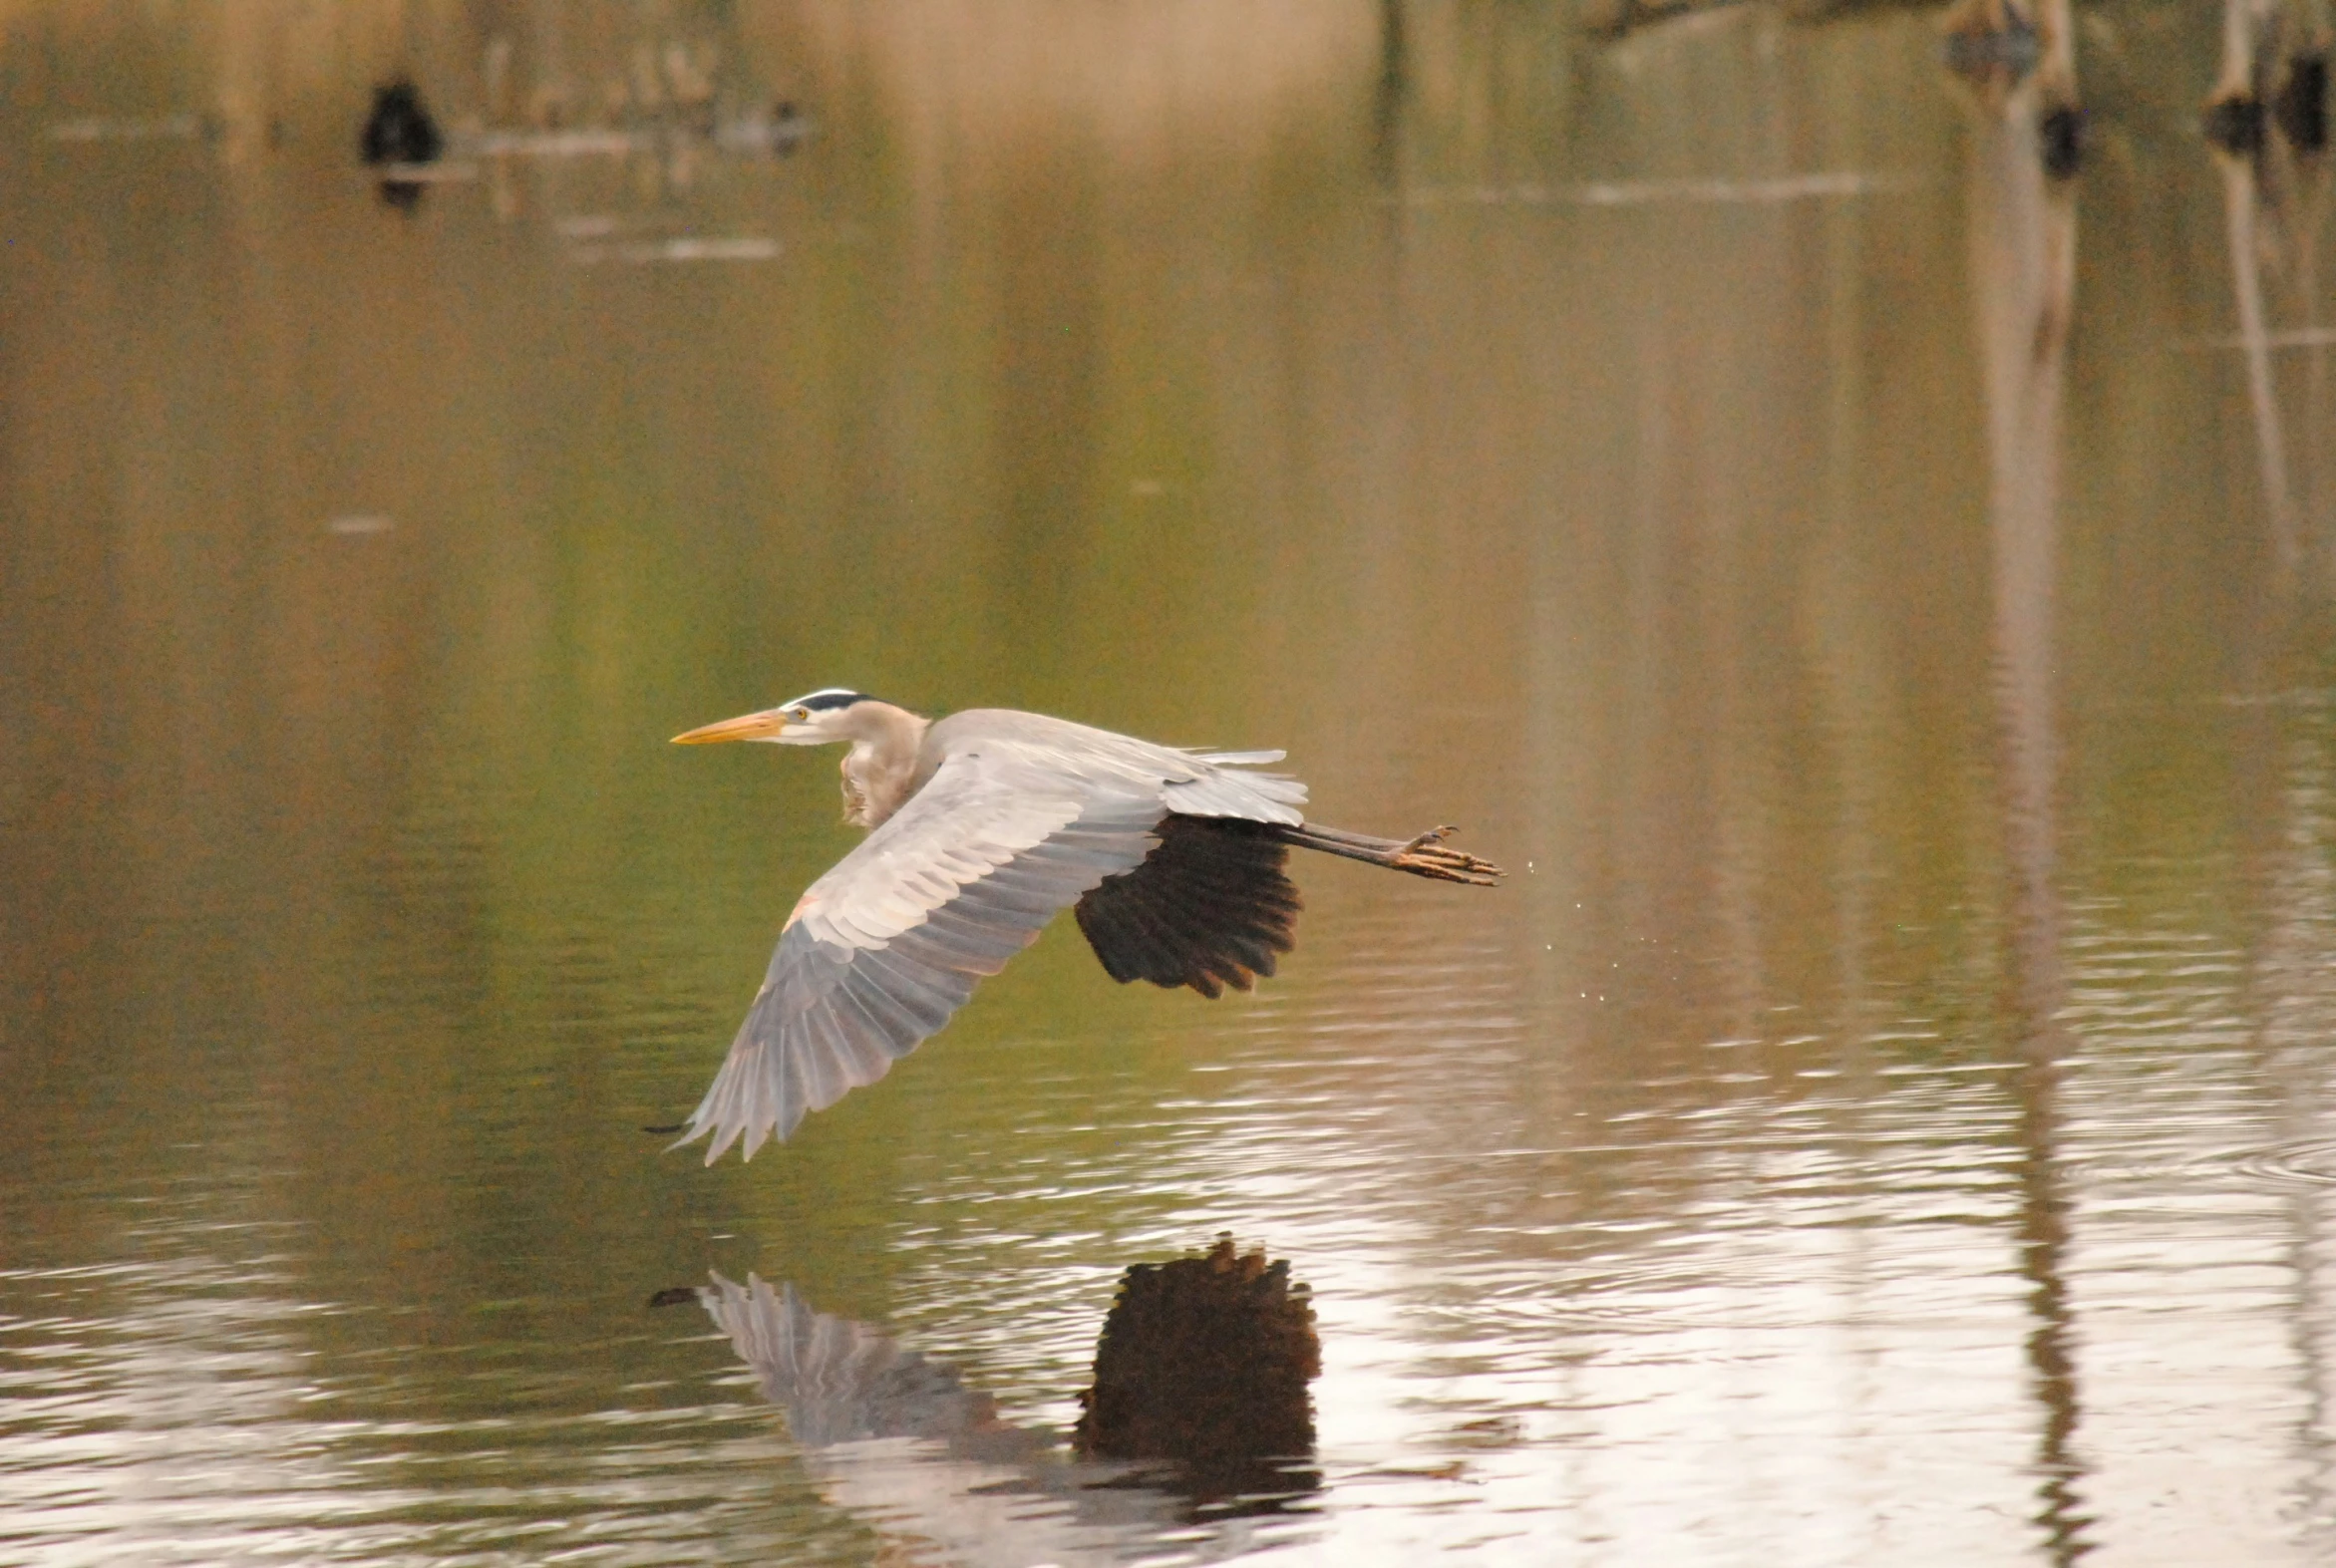 a bird is flying low over the water